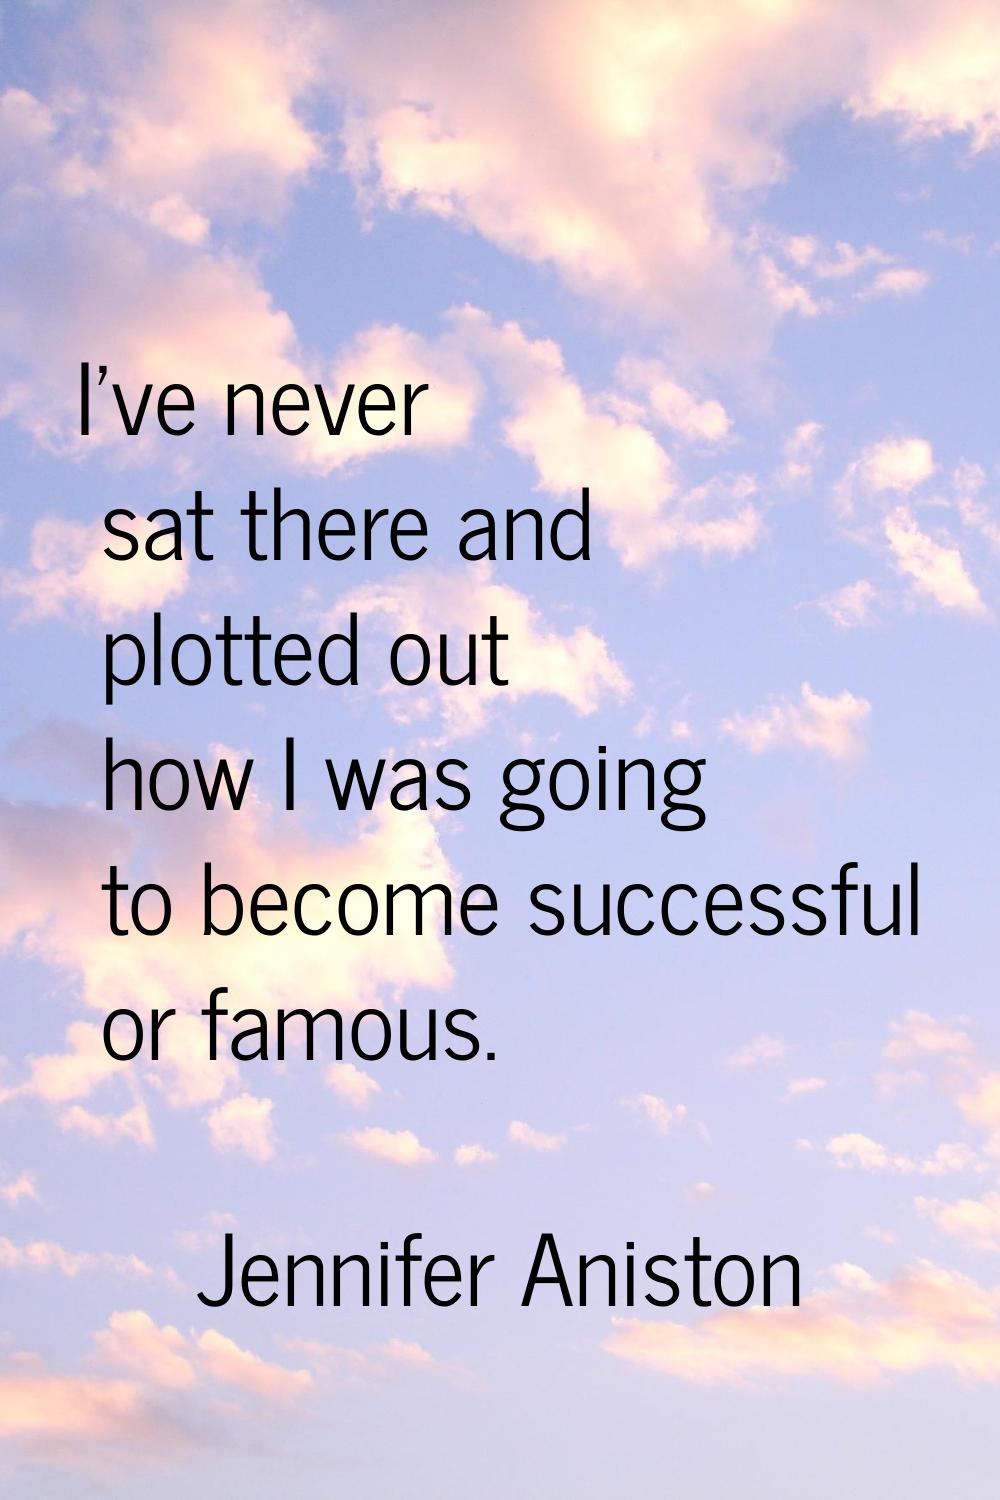 I've never sat there and plotted out how I was going to become successful or famous.